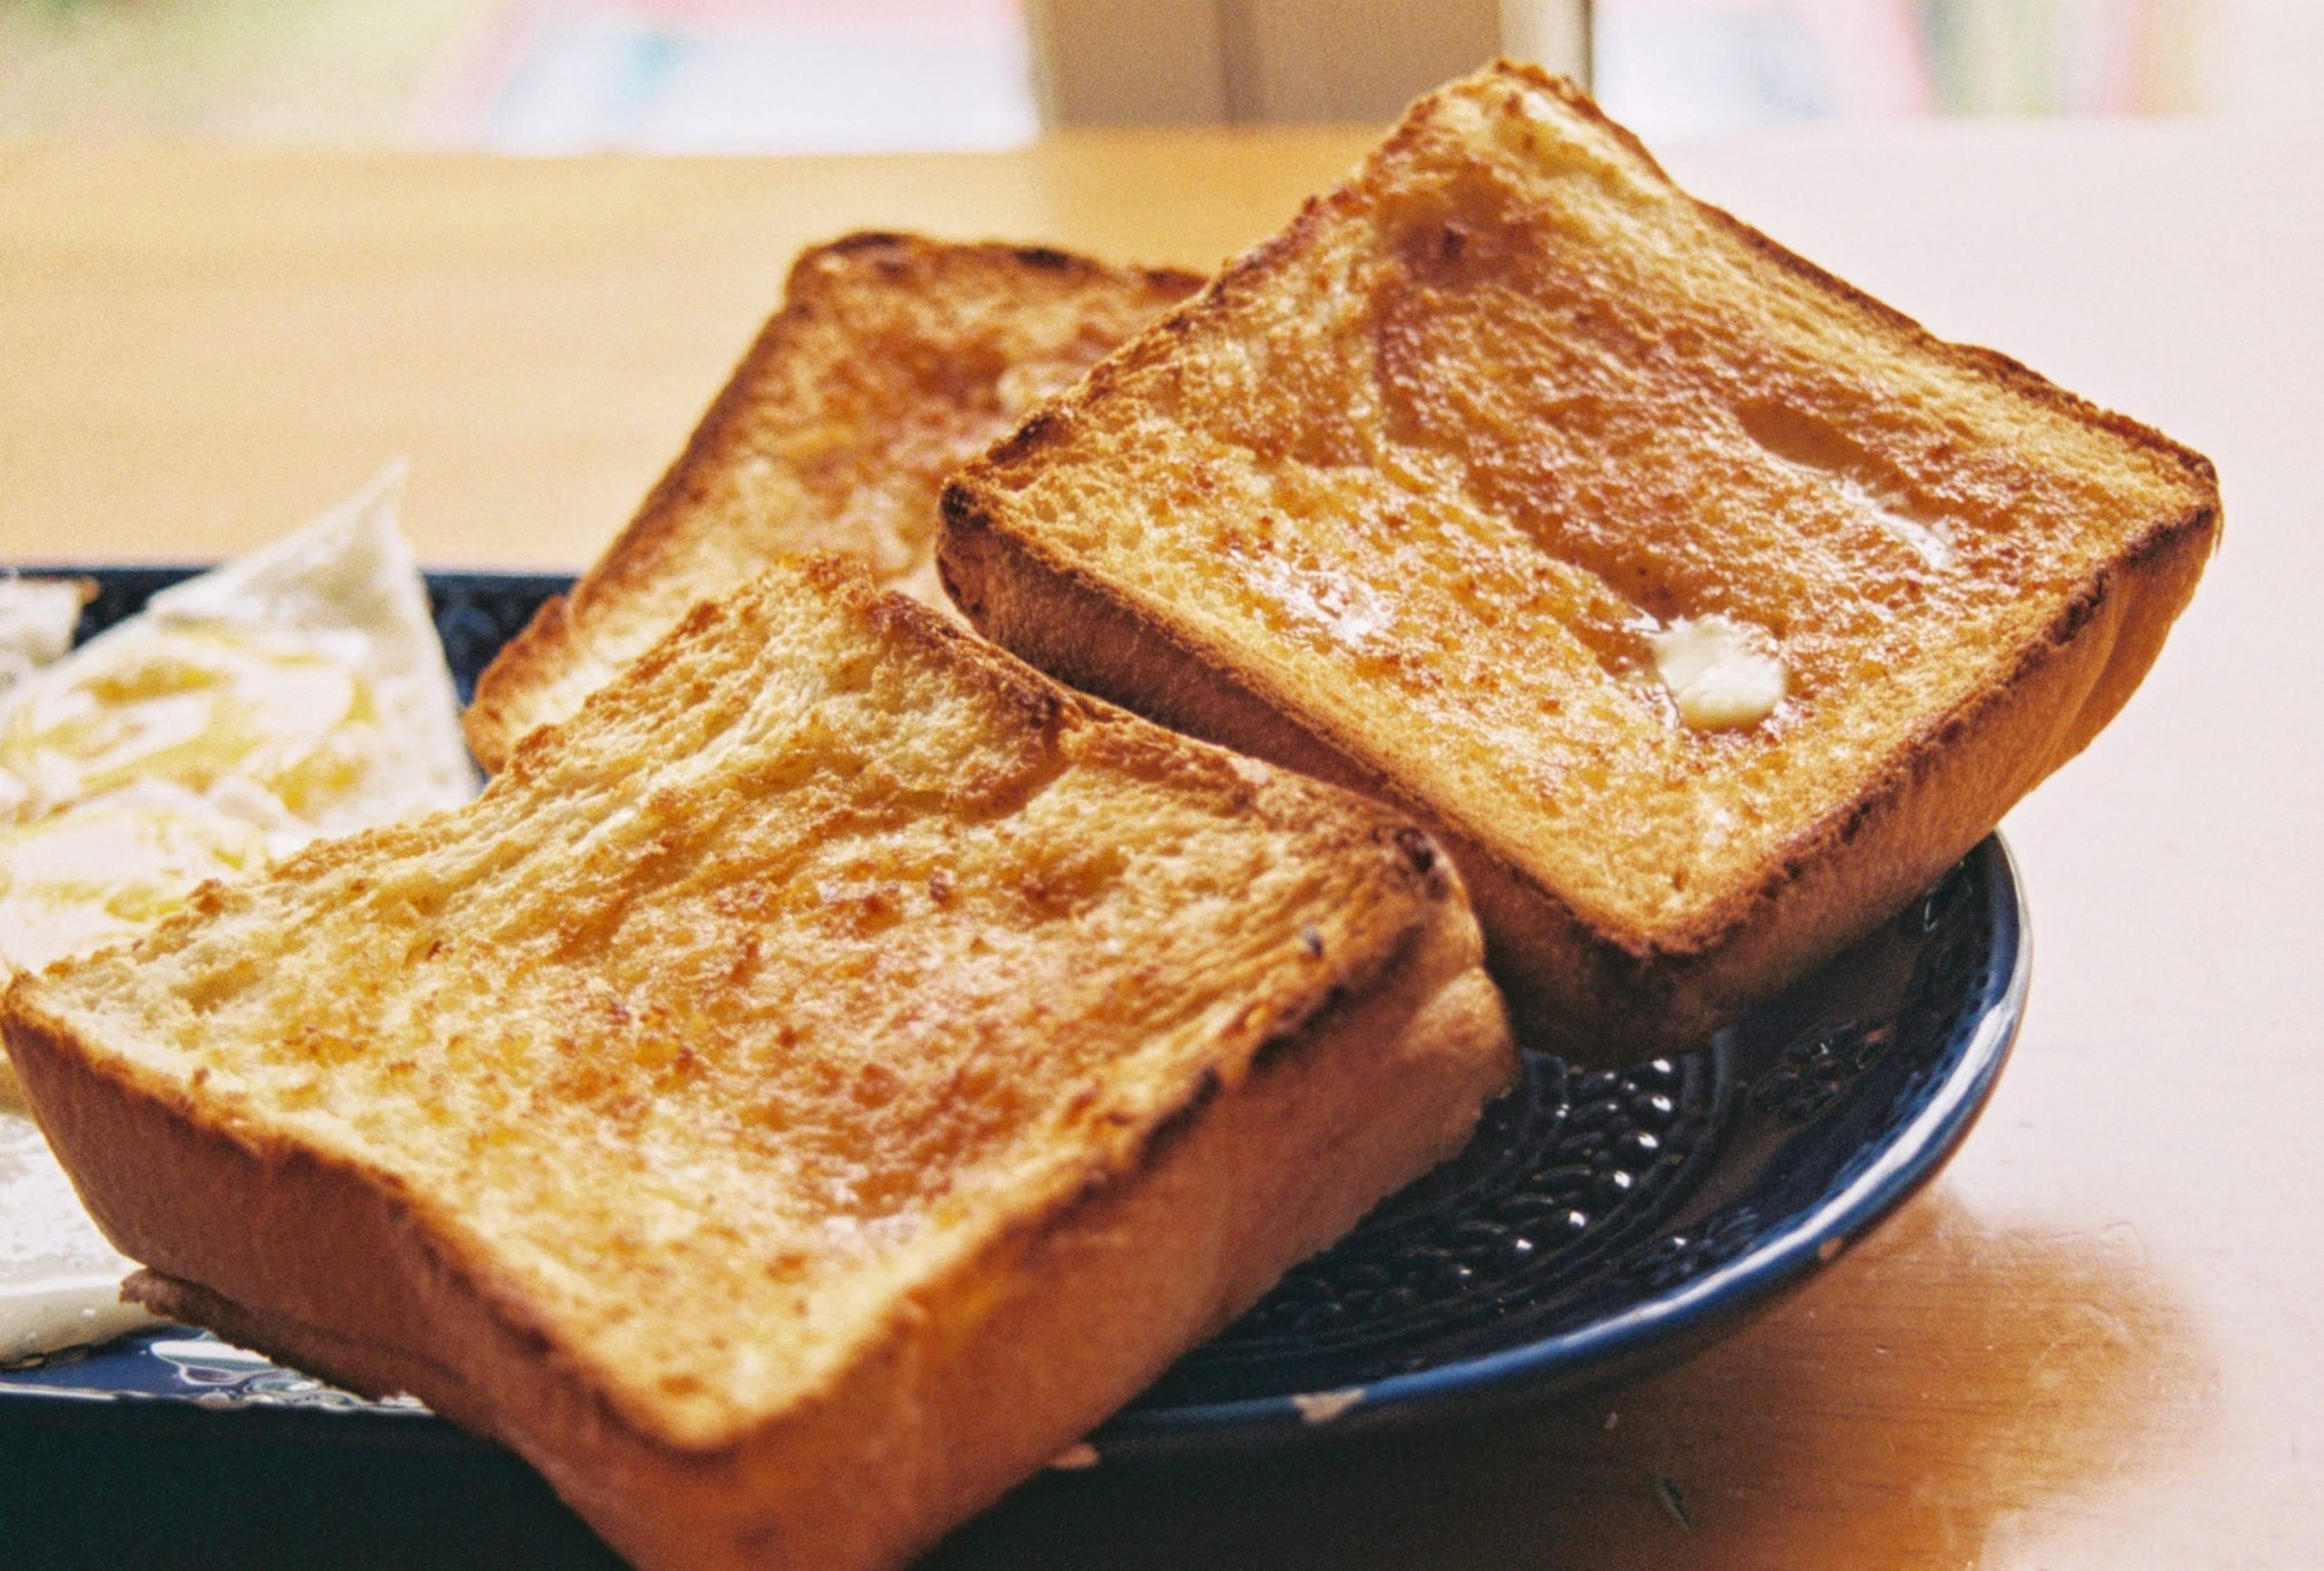 3 pieces of toasted bread on a black plate on a wooden table